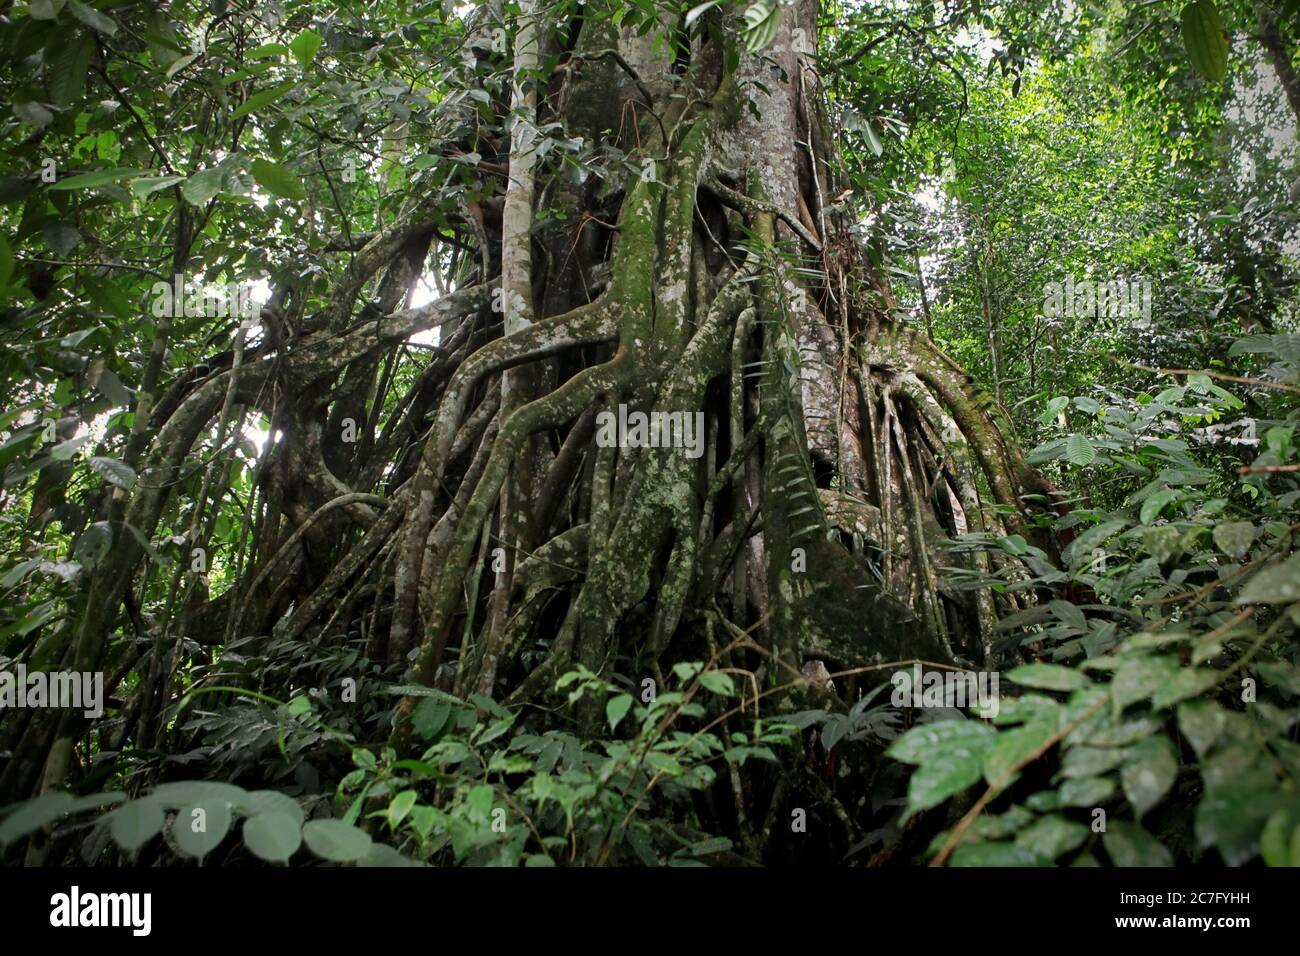 A giant epiphytic plant within the tropical rainforest of Gunung Leuser National Park, close to Tangkahan ecotourism village, Sumatra, Indonesia. Stock Photo